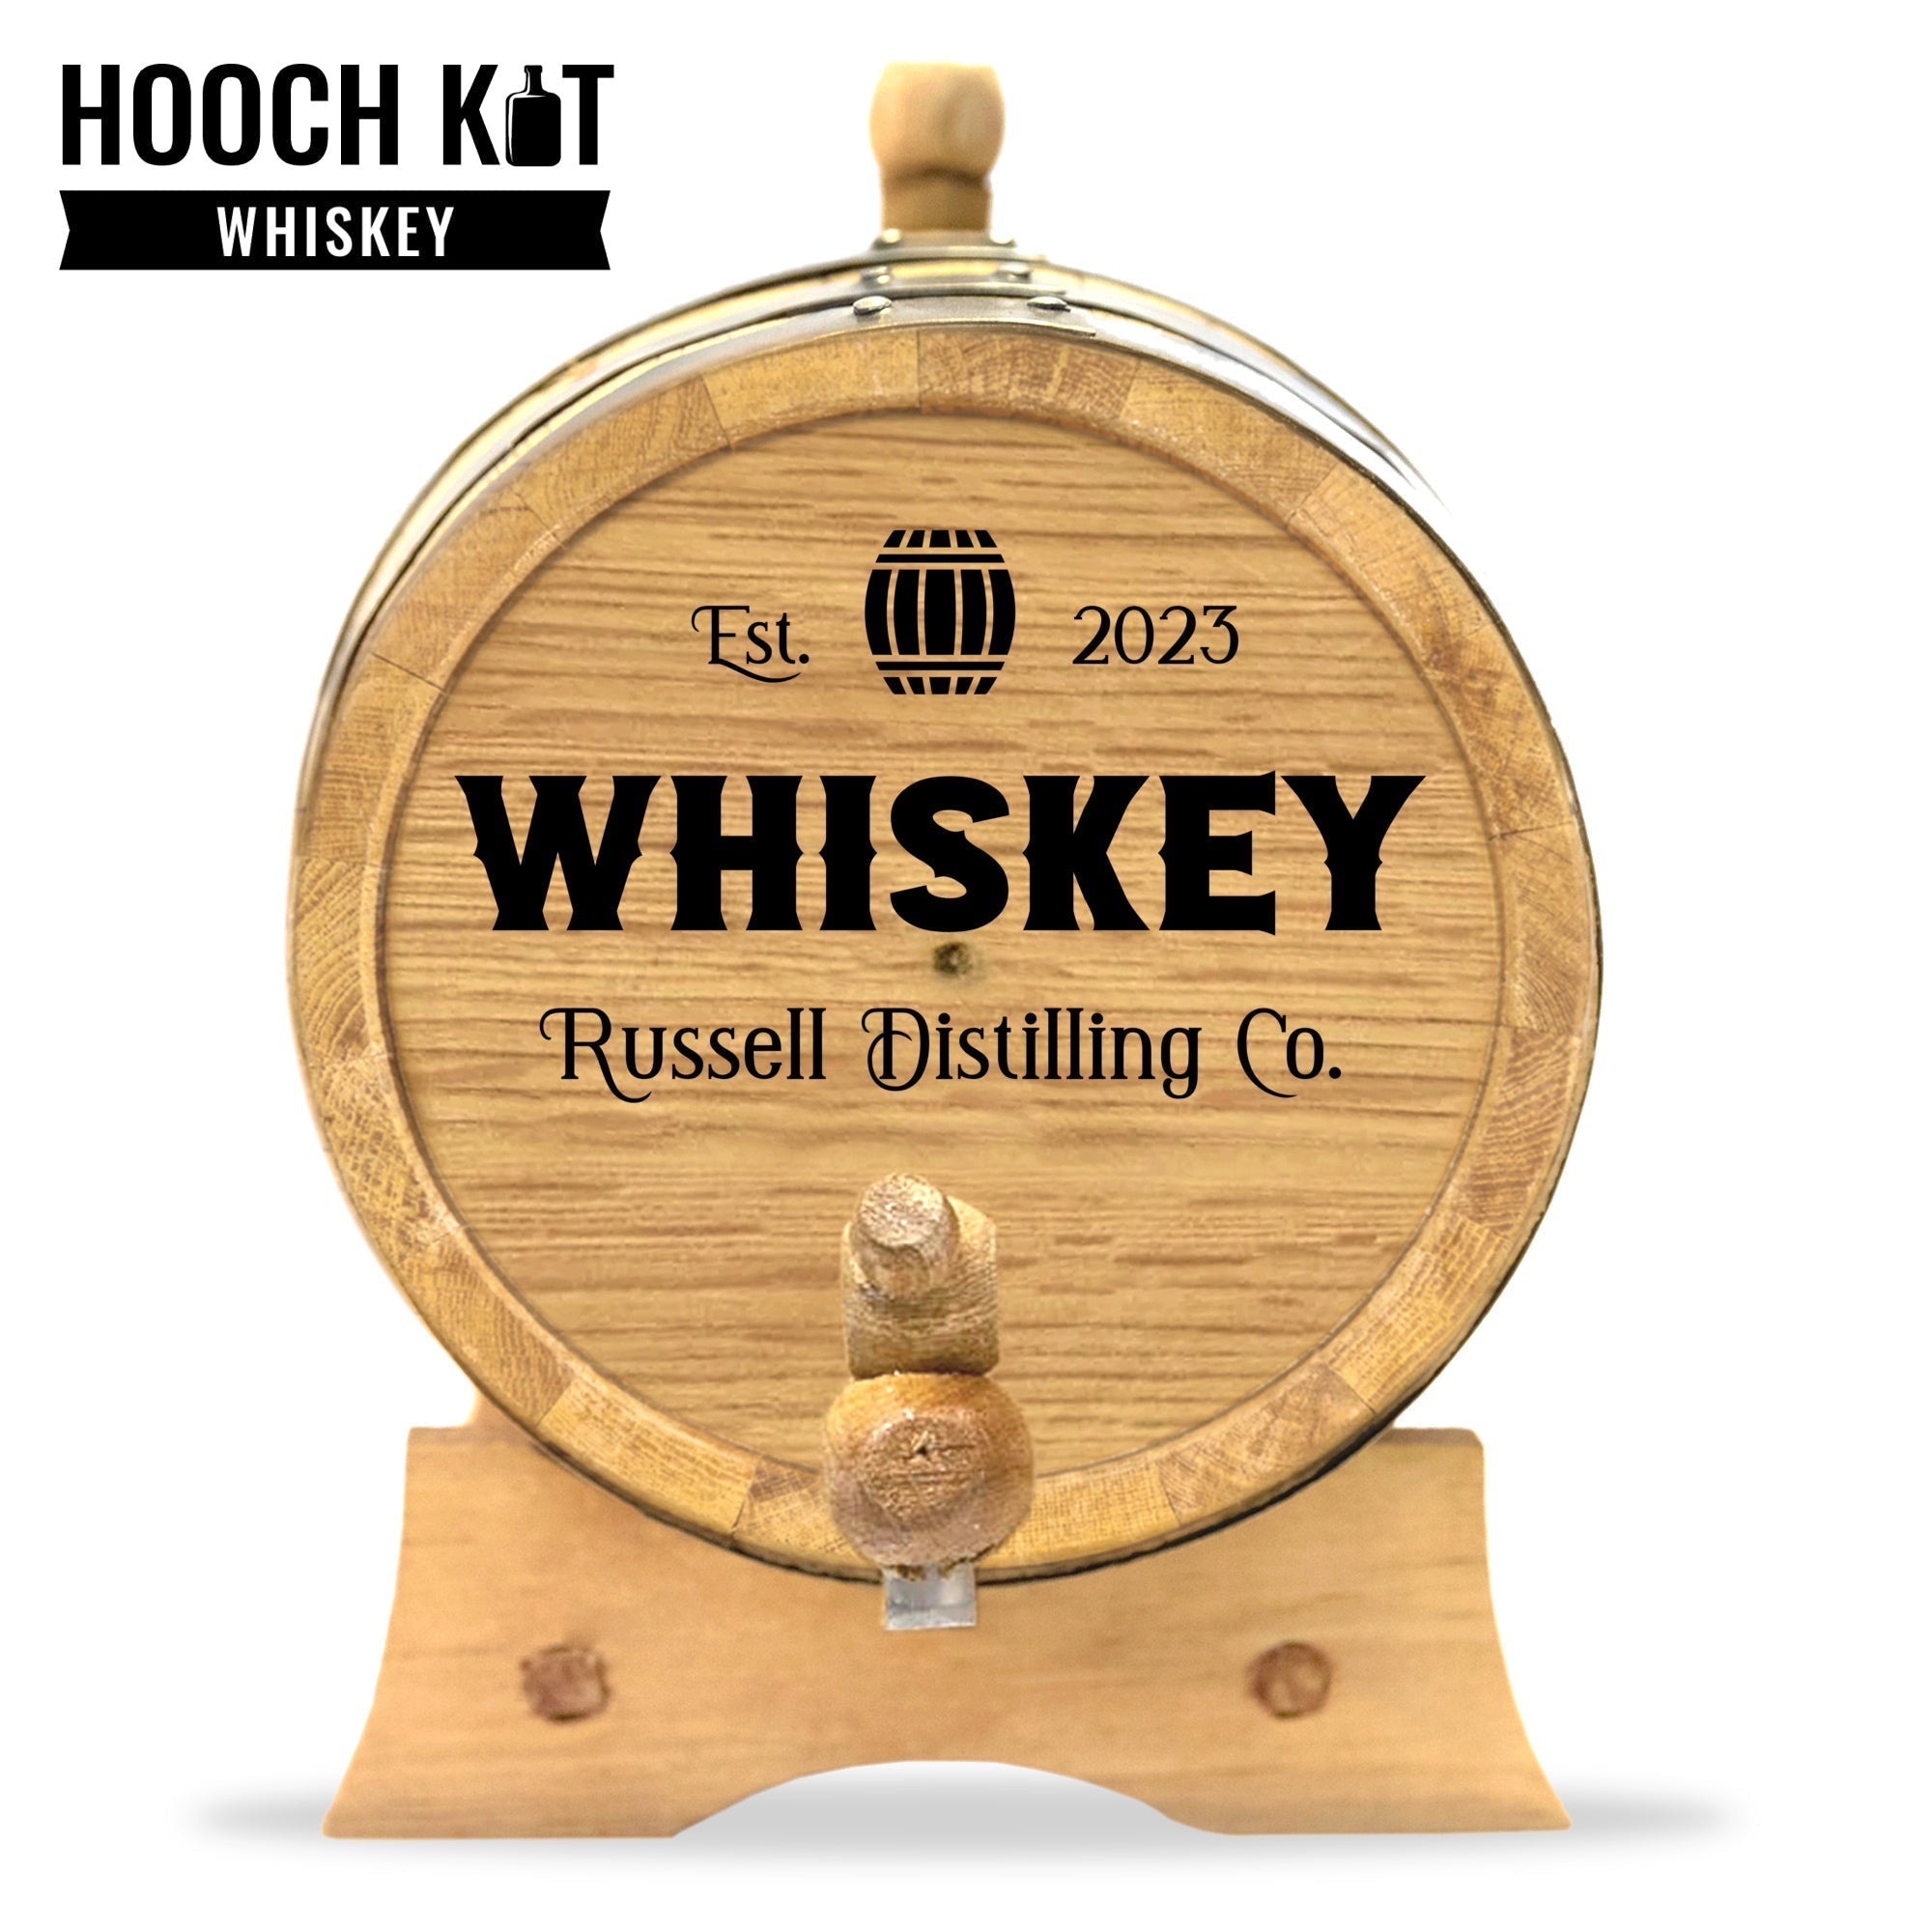 Personalized Whiskey Barrel + Whiskey Making Kit | The Home Distiller's Choice for DIY Spirits | Distilling Co. Series - Blind Pig Drinking Co.